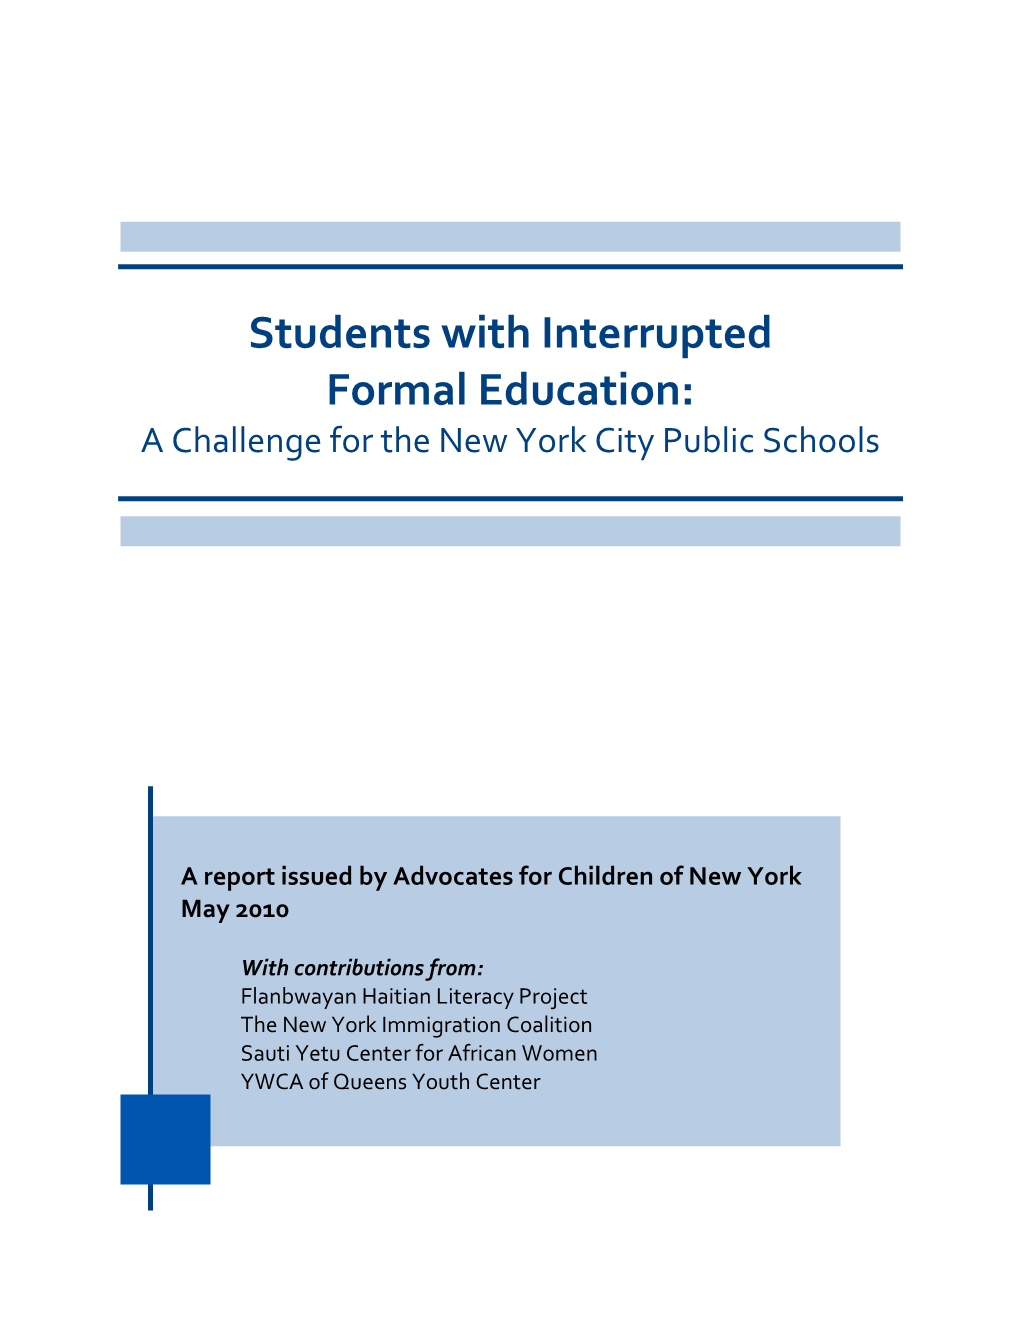 Students with Interrupted Formal Education: a Challenge for the New York City Public Schools